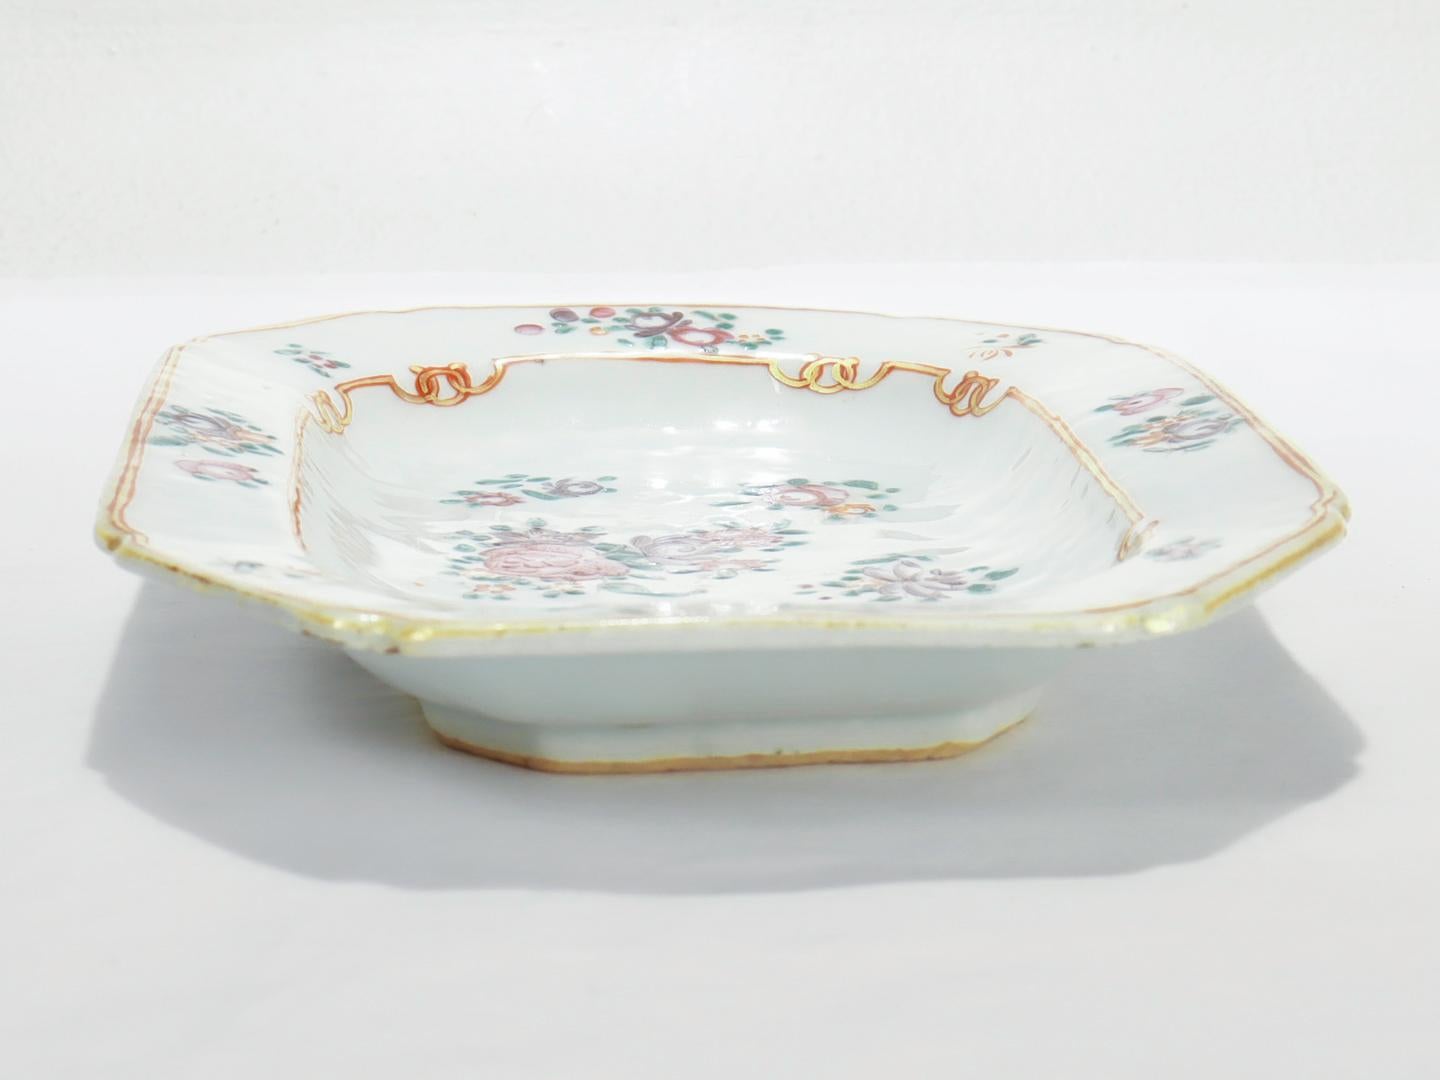 Small Antique 18th Century Famille Rose Chinese Export Tray or Dish For Sale 3